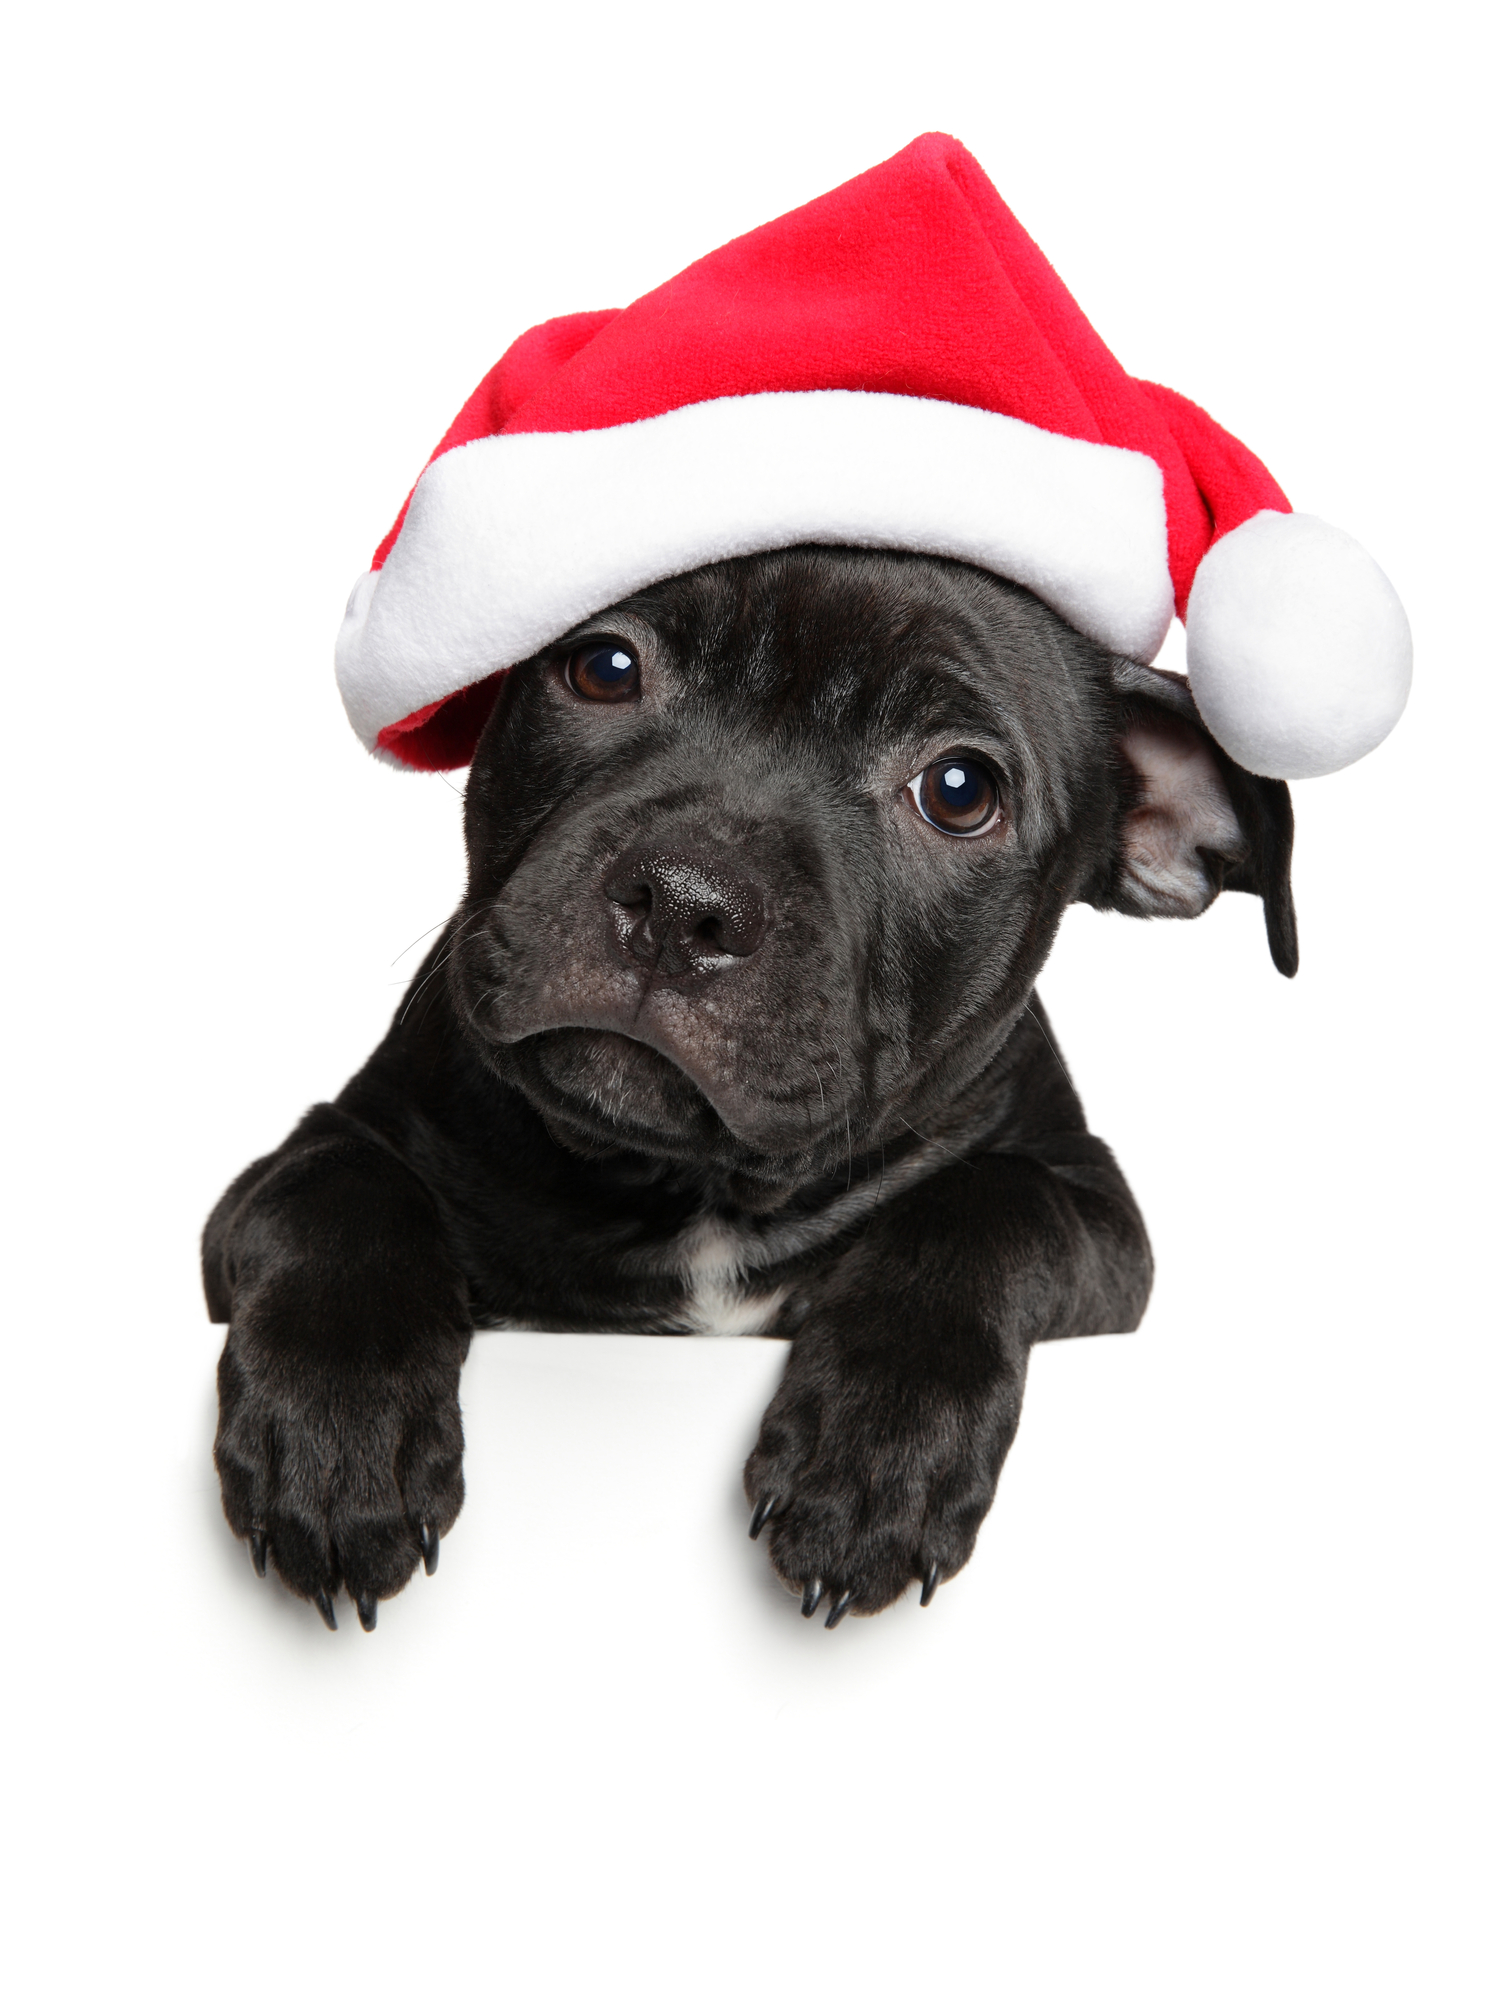 American Staffordshire terrier puppy in Santa red hat above banner, isolated on white background. Christmas animals theme